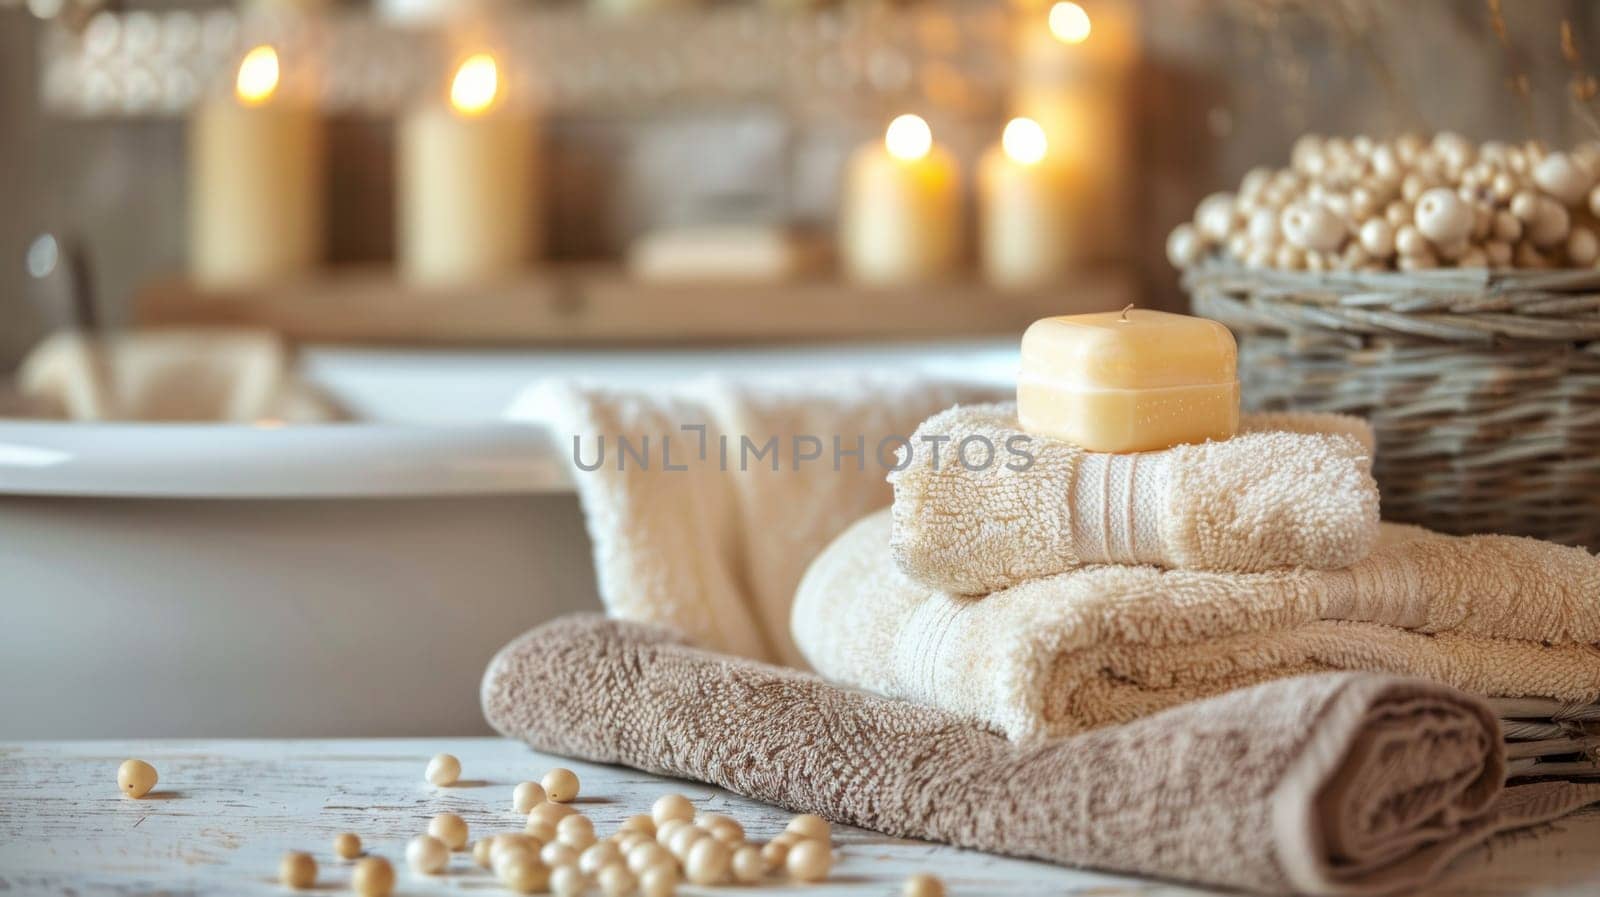 A bunch of towels and candles on a table in front of the tub